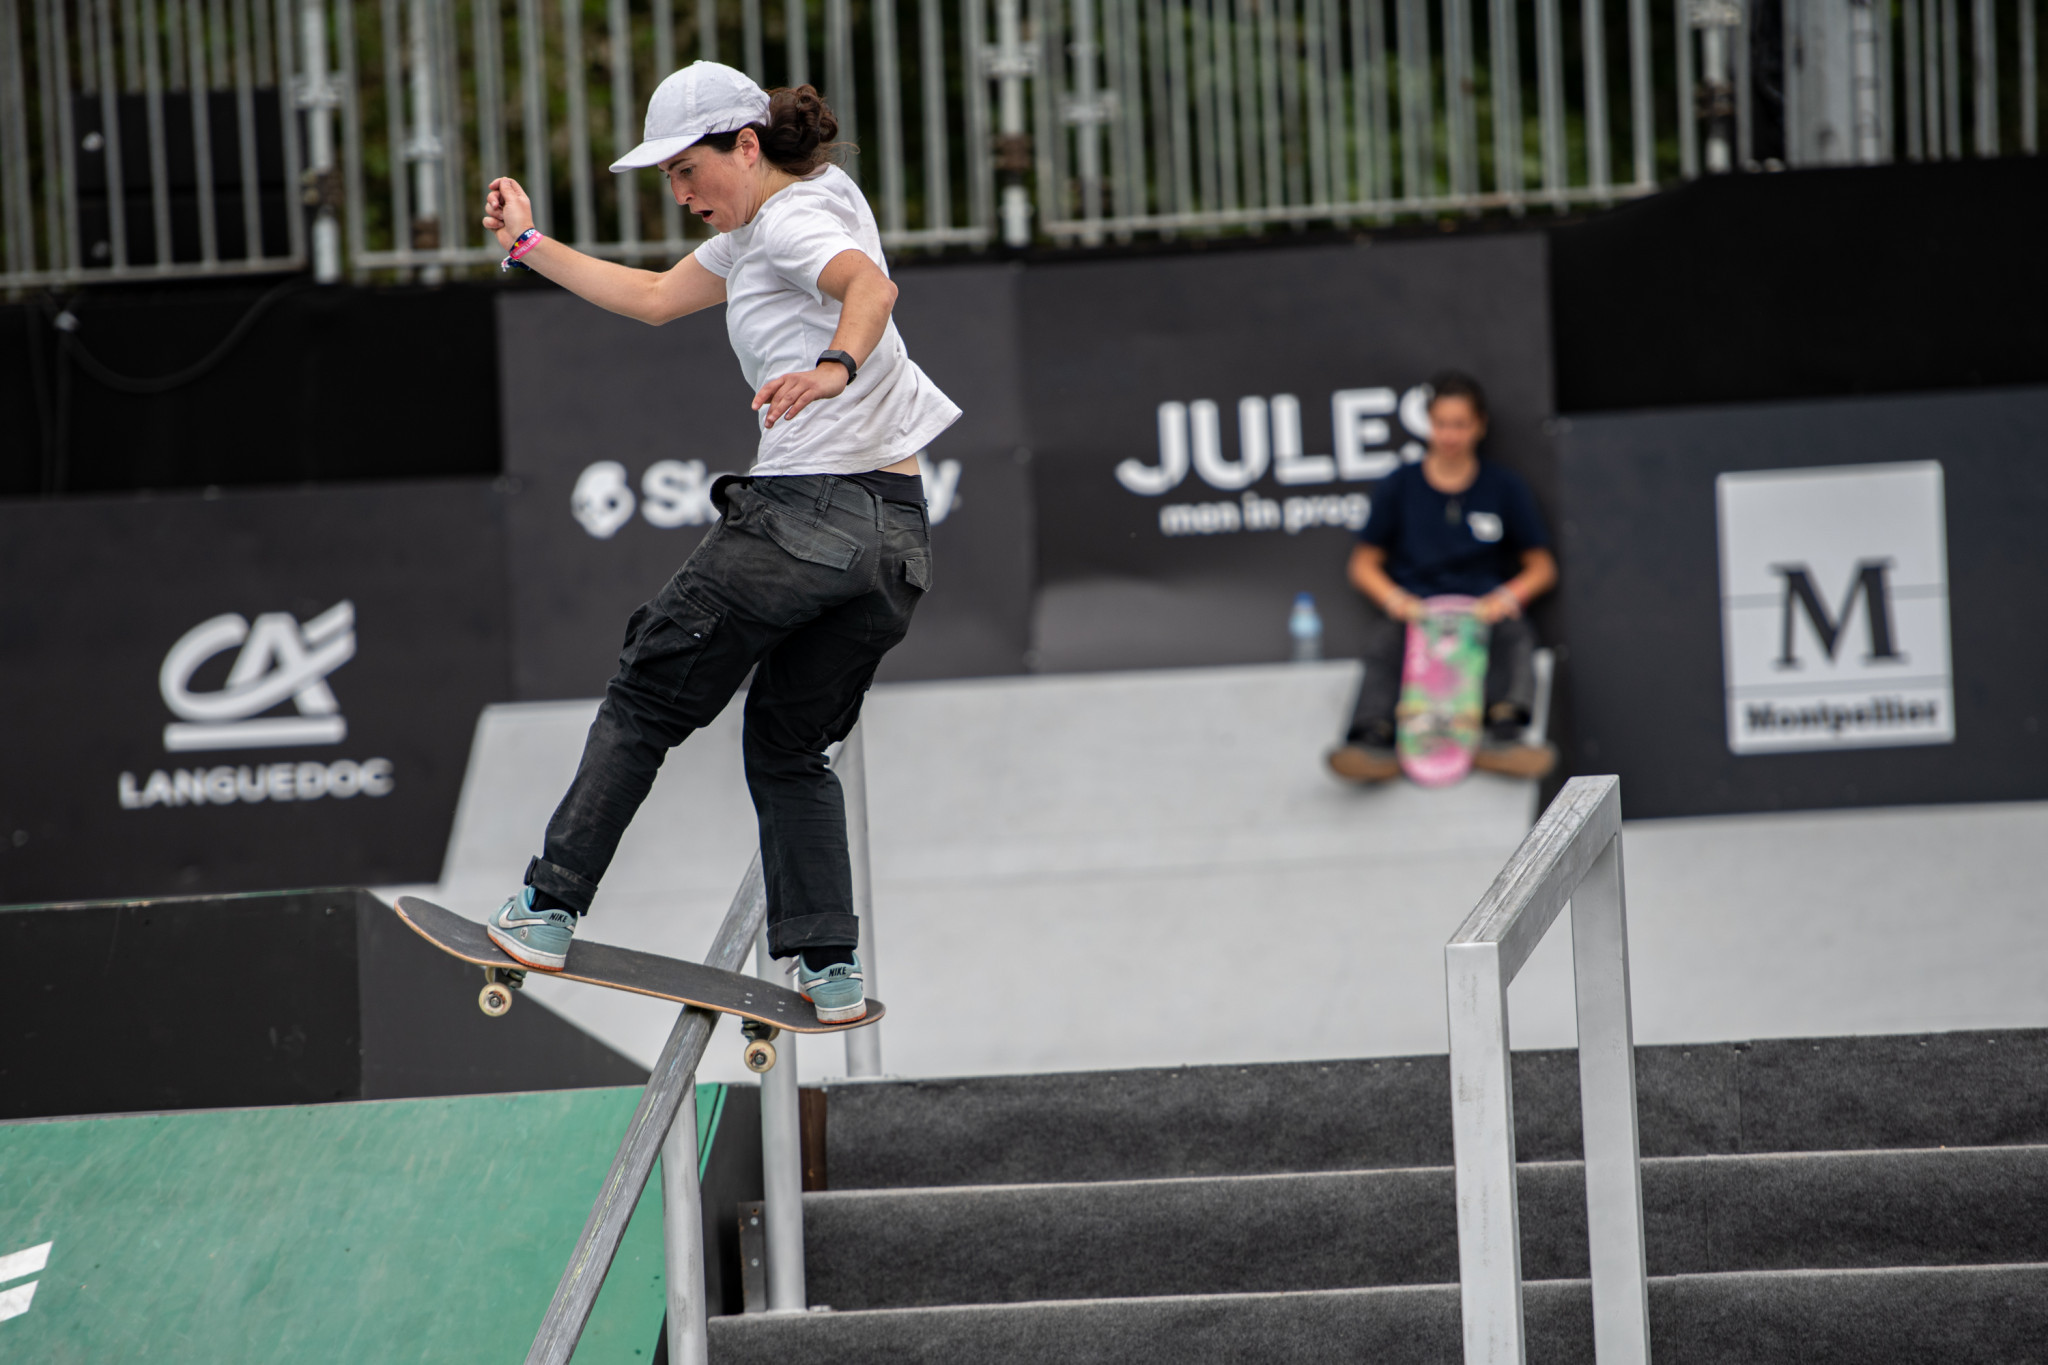 Charlotte Hym lived up to her favourite tag after dominating the qualifying stage to win gold ©Hurricane - FISE